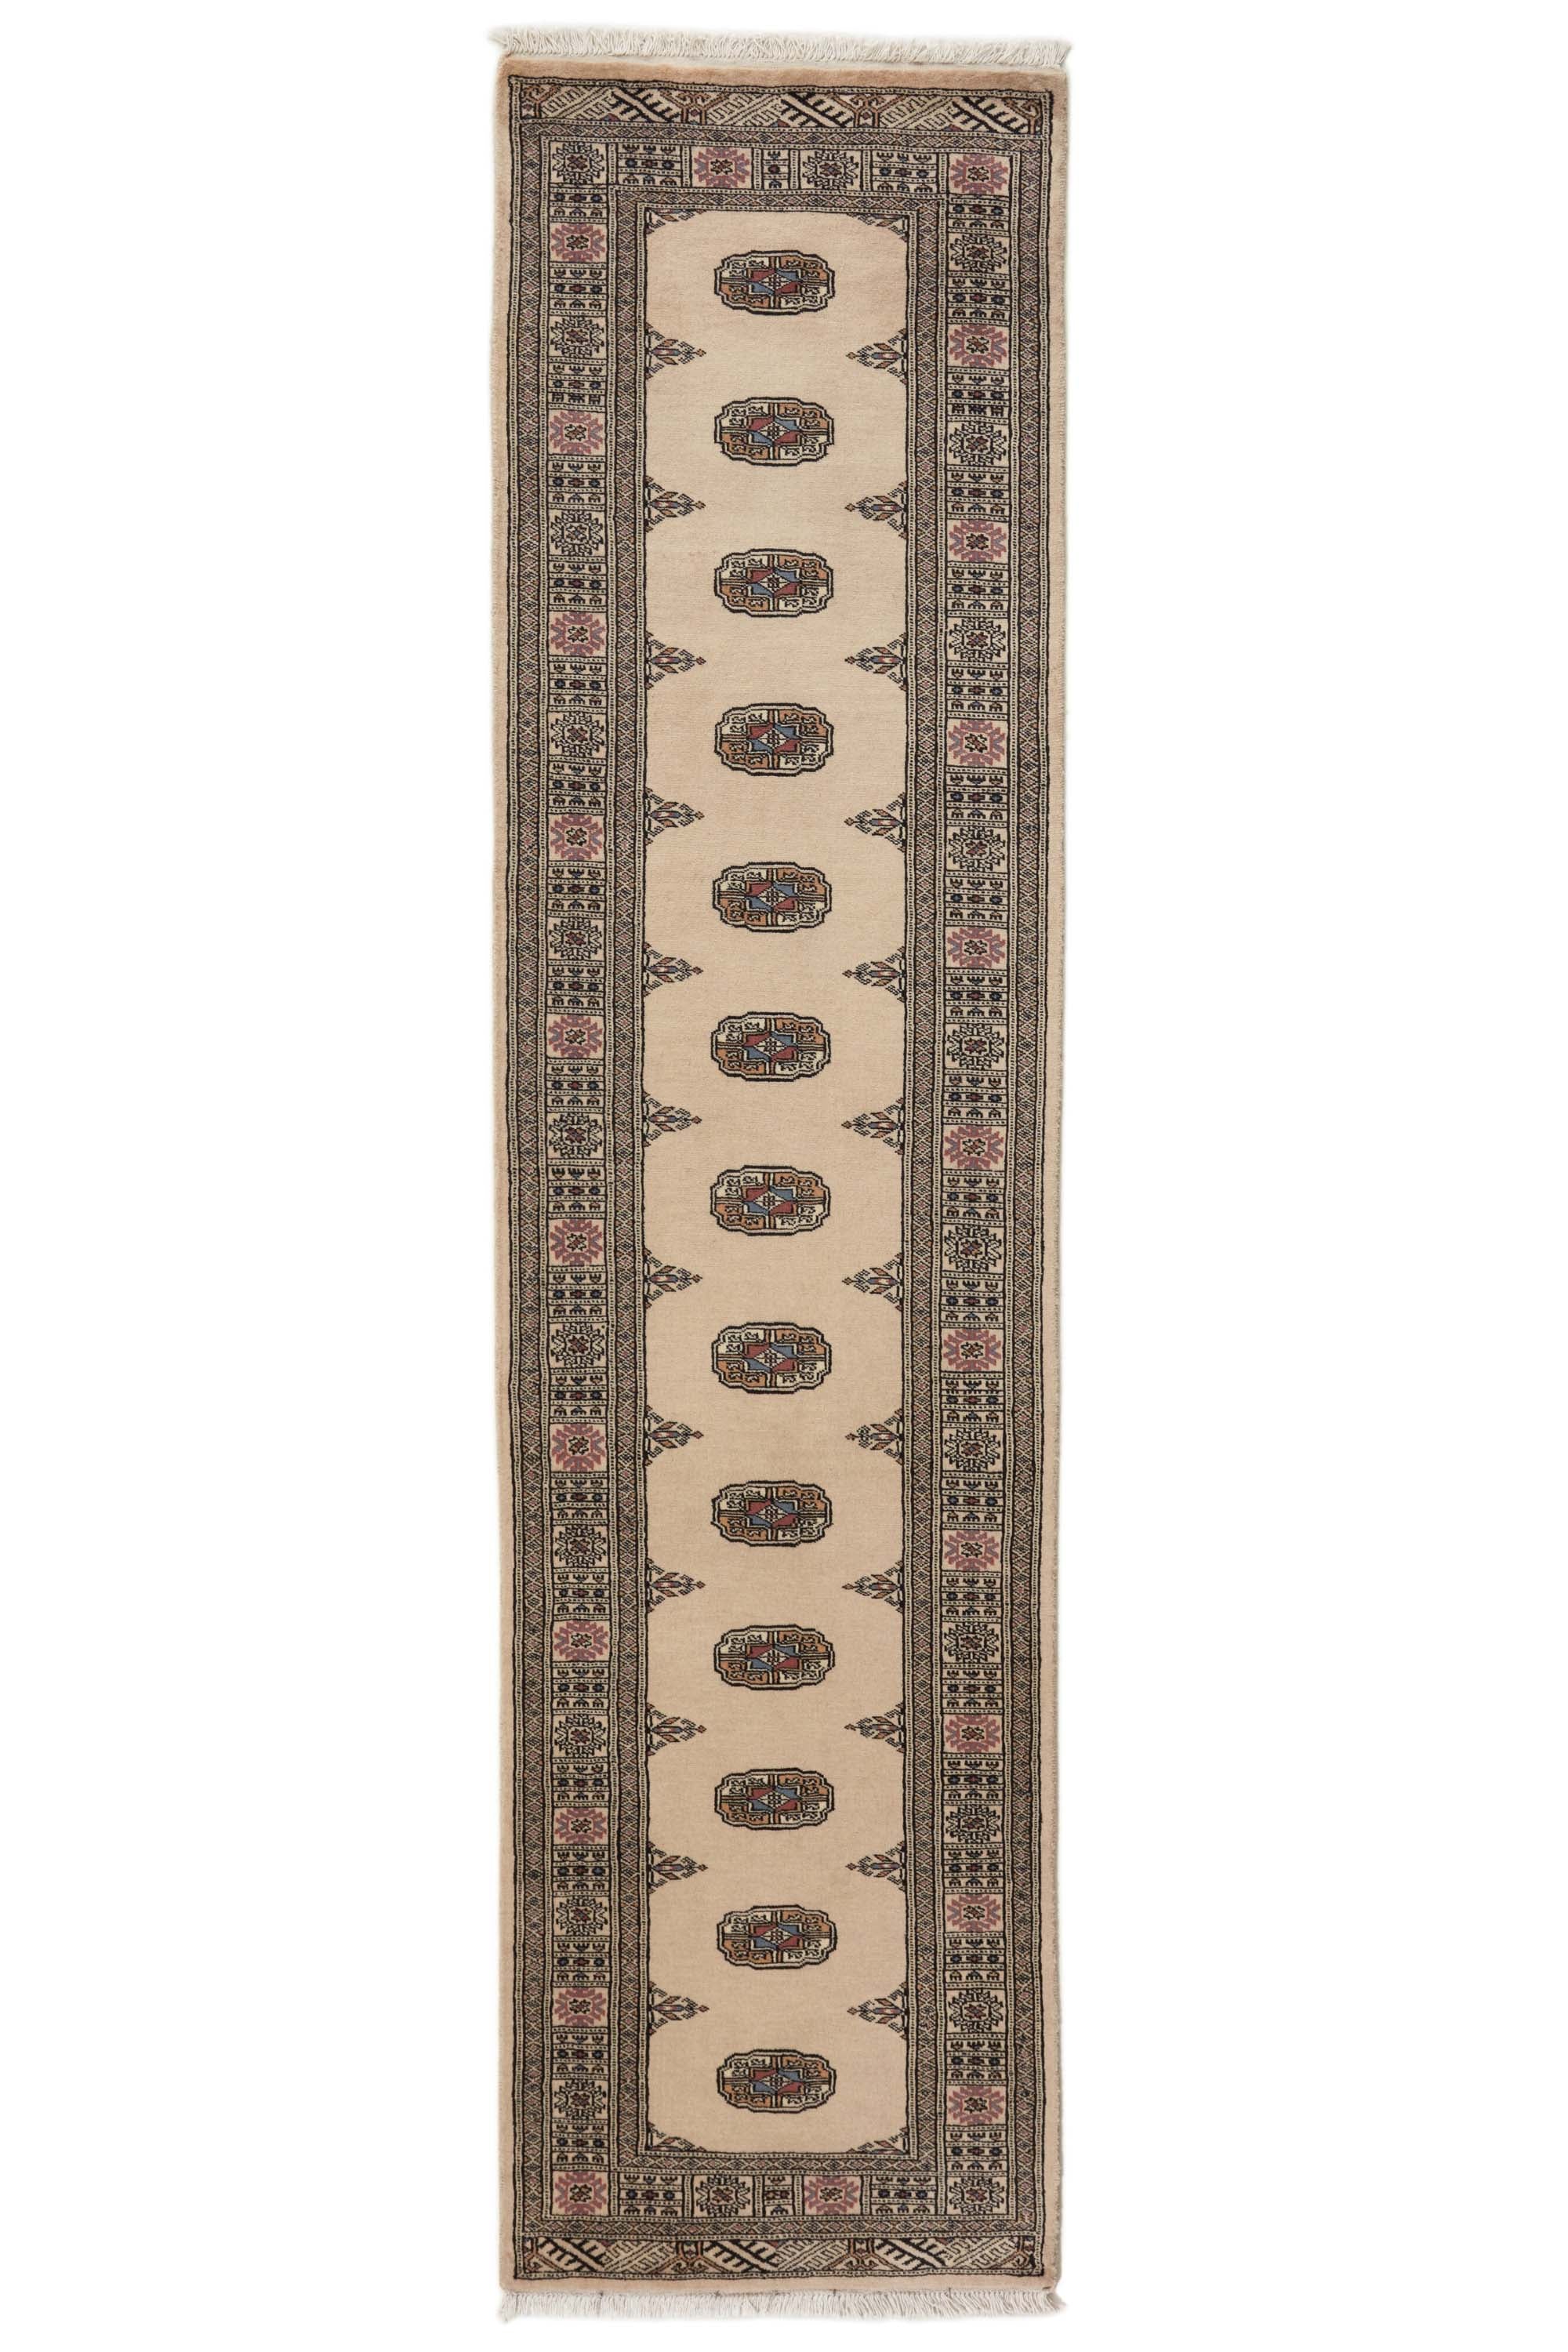 Beige Oriental Bokhara 2 ply runner rug with bordered pattern